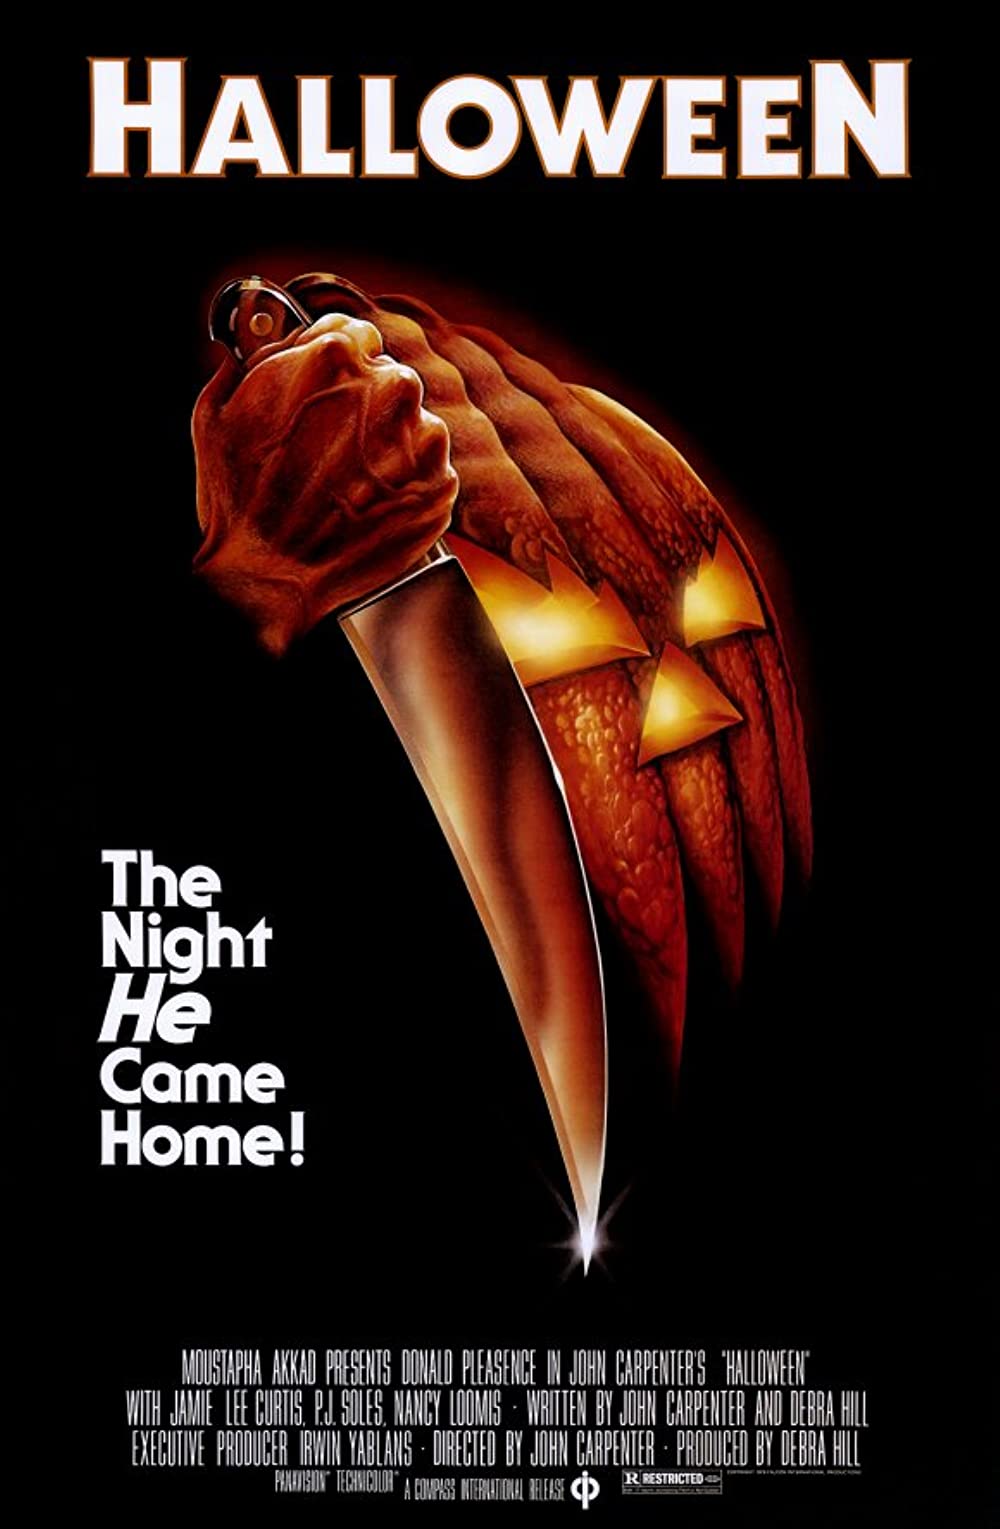 Michael Myers; Halloween 
(Provided by Blumhouse Productions, Mirmax, Rough House Pictures,
Trancas International Films, and
Universal Pictures.)